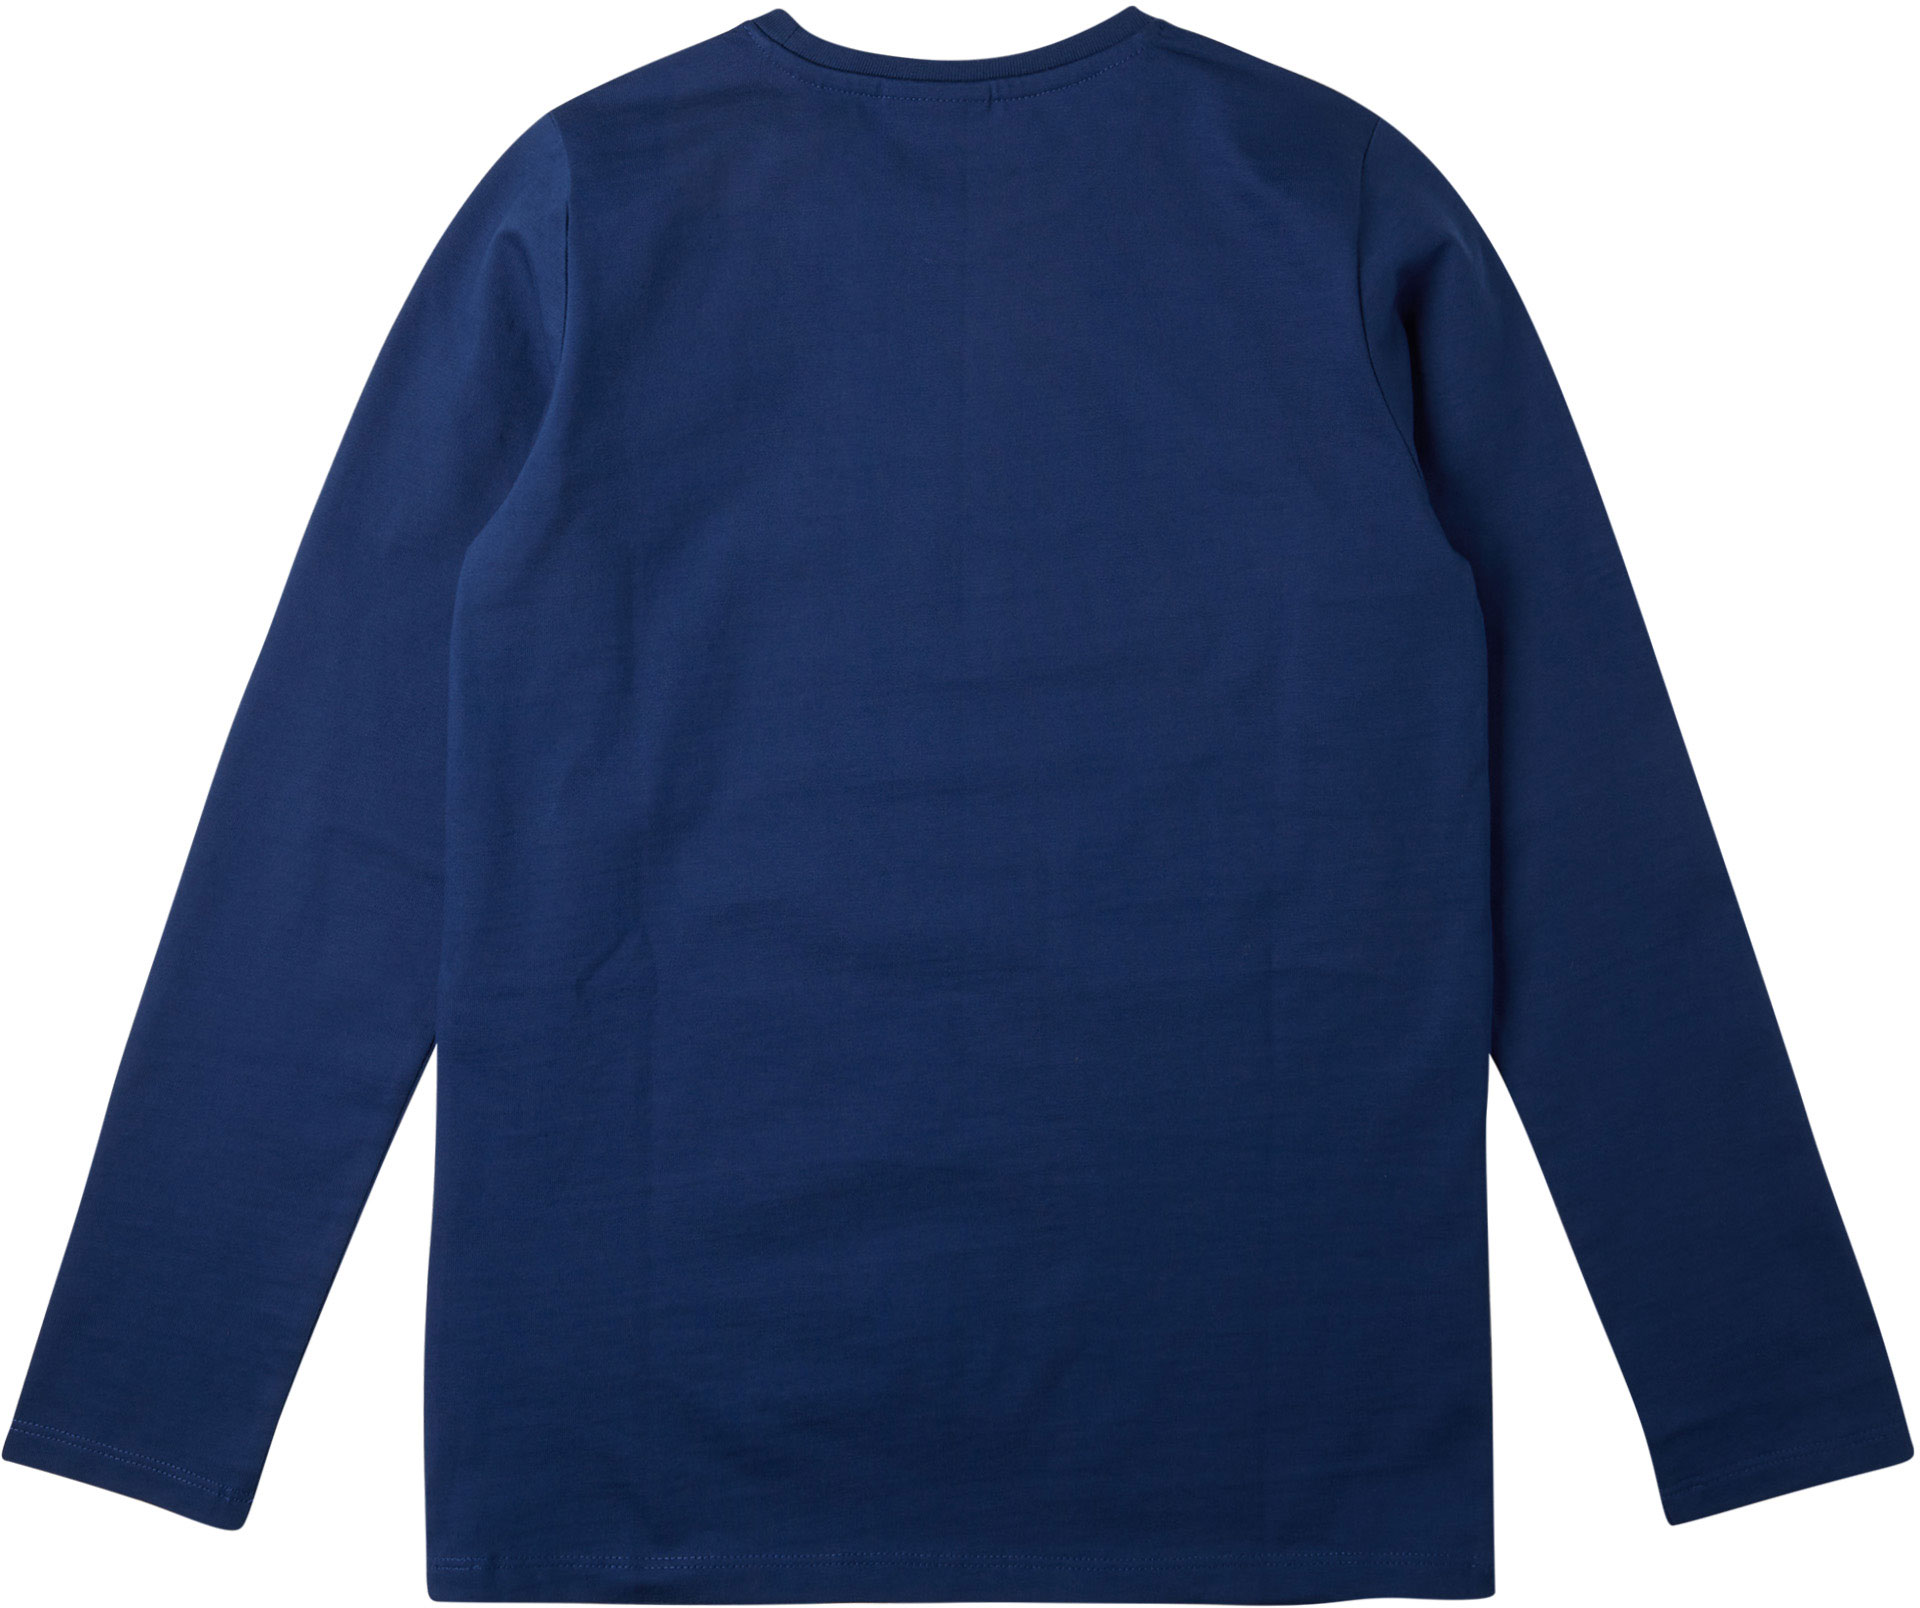 Boys' T-shirt with long sleeves